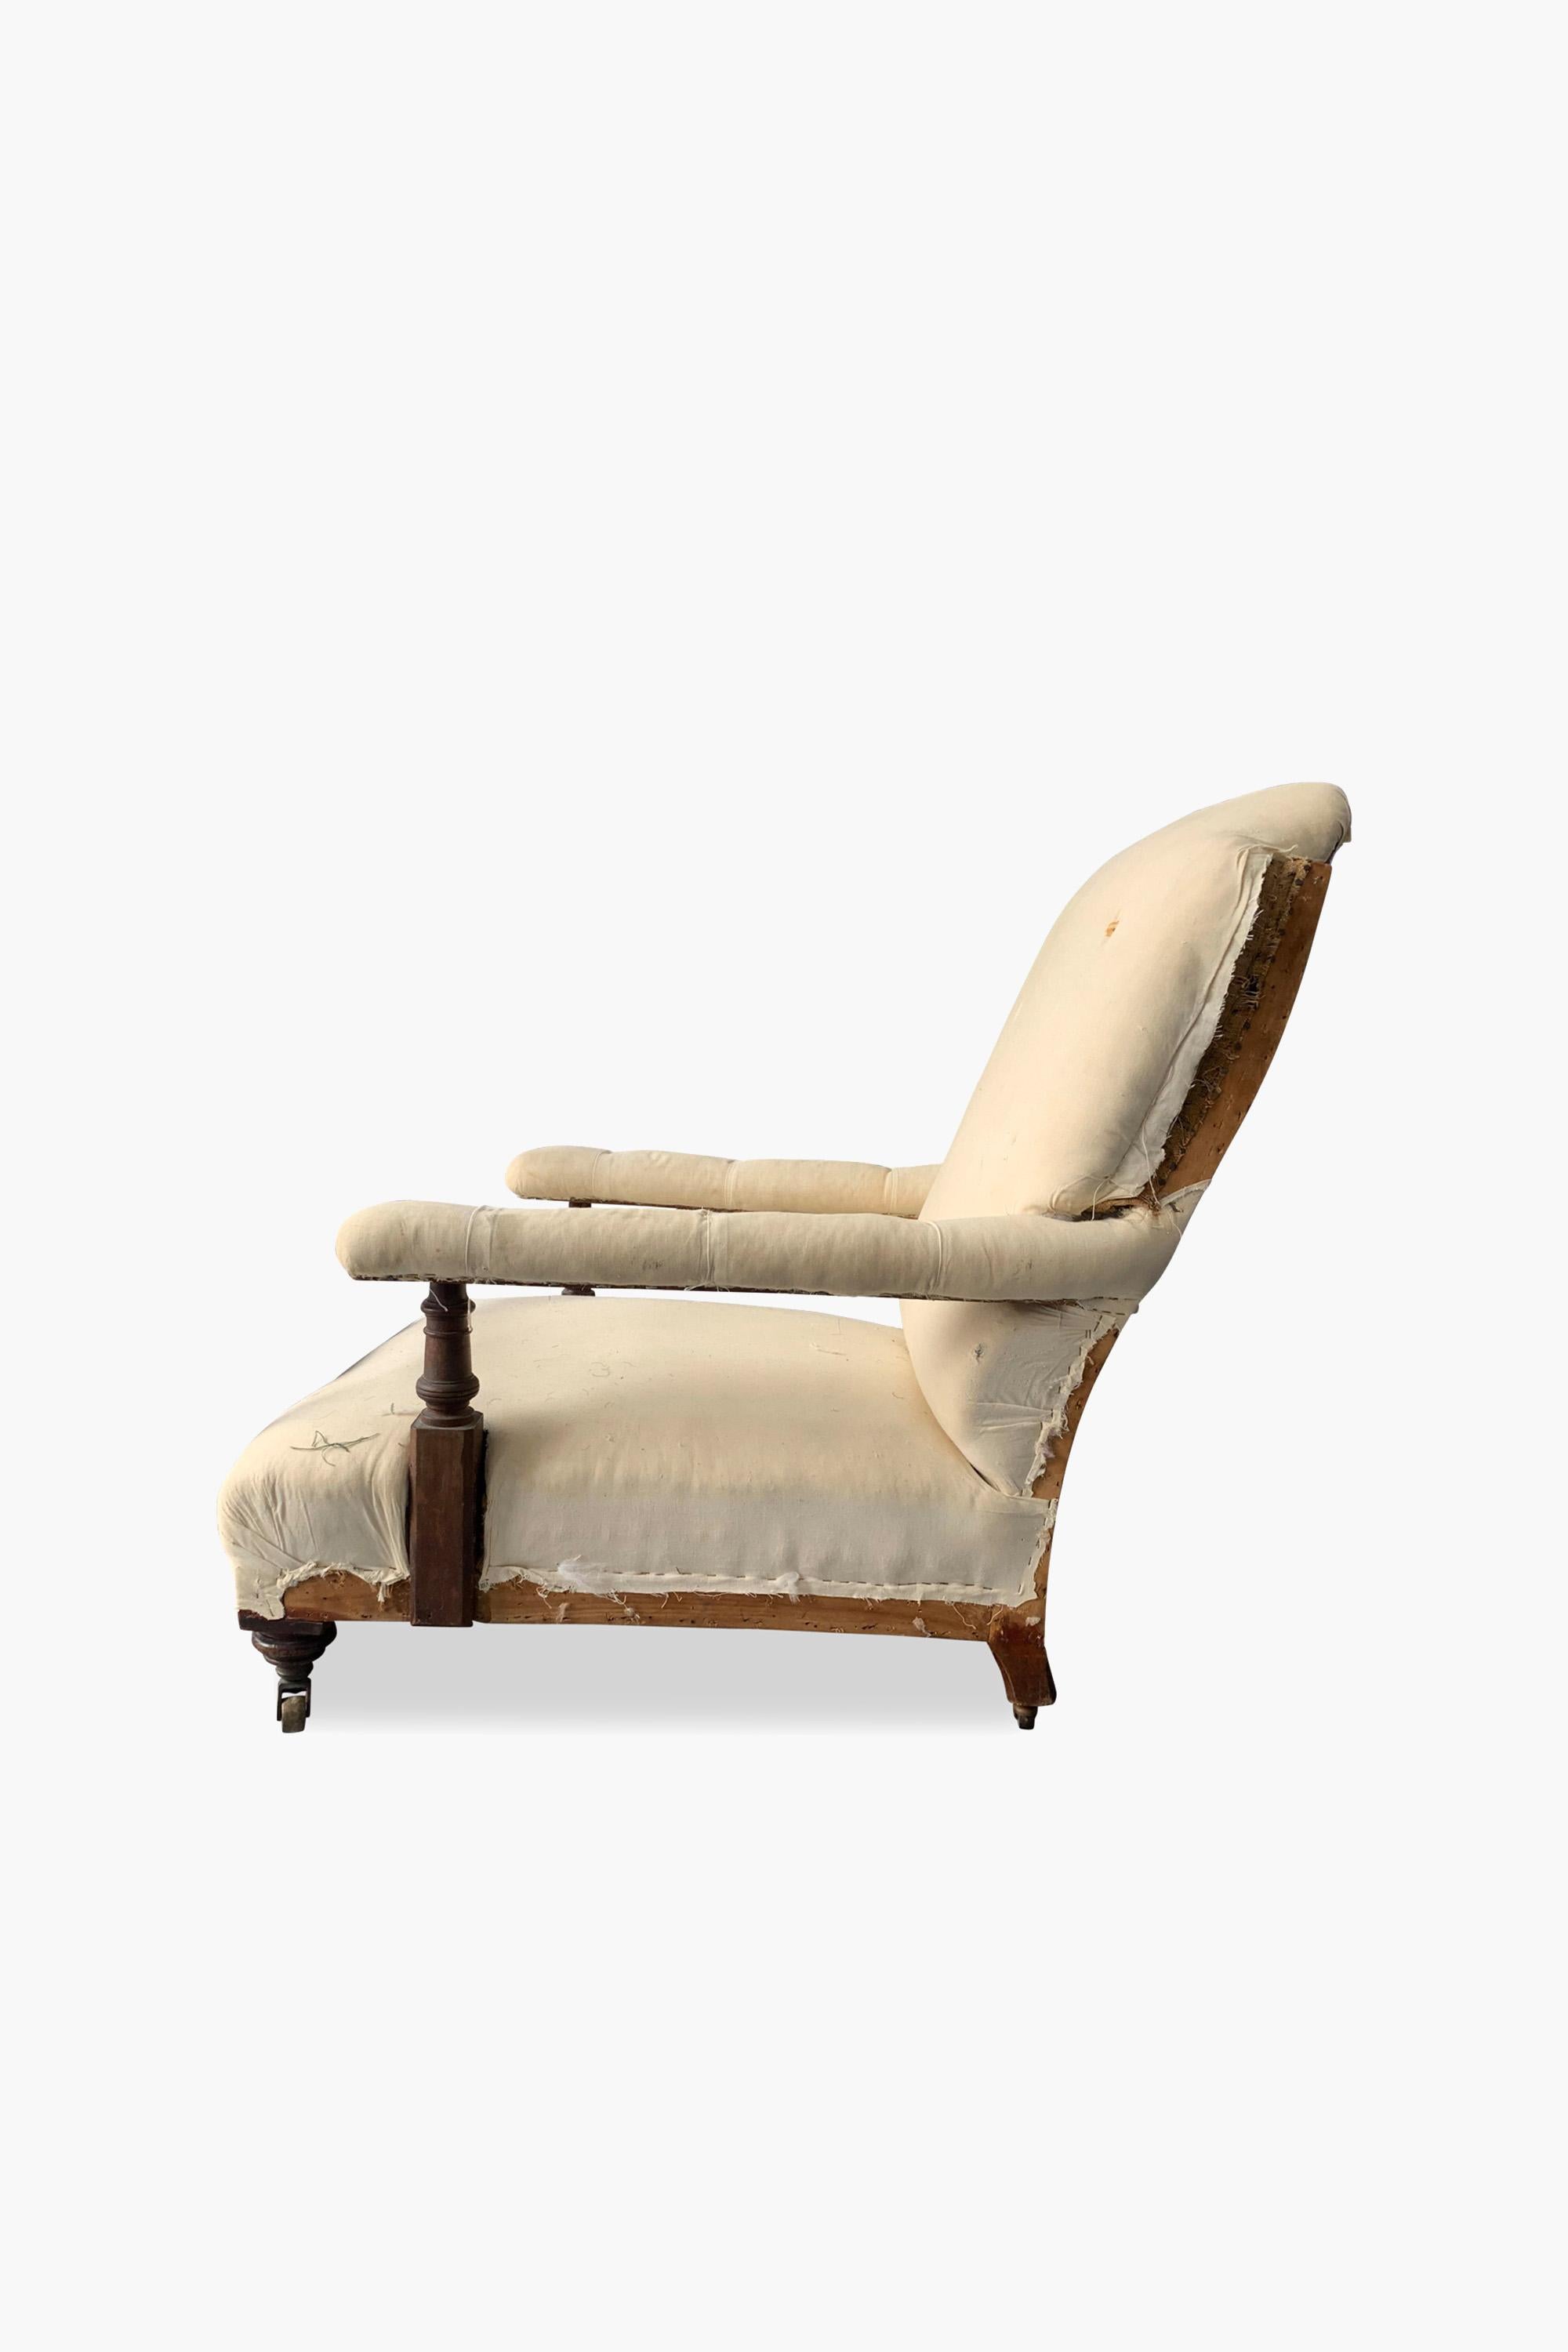 Large Victorian Open Armchair by Maple & Co.

A large Victorian upholstered open armchair, stamped 'Maple & Co'

Stripped to original upholstery. Full re-upholstery can be arranged to specification.

Dimensions: H 80cm x W 80cm x D 96cm